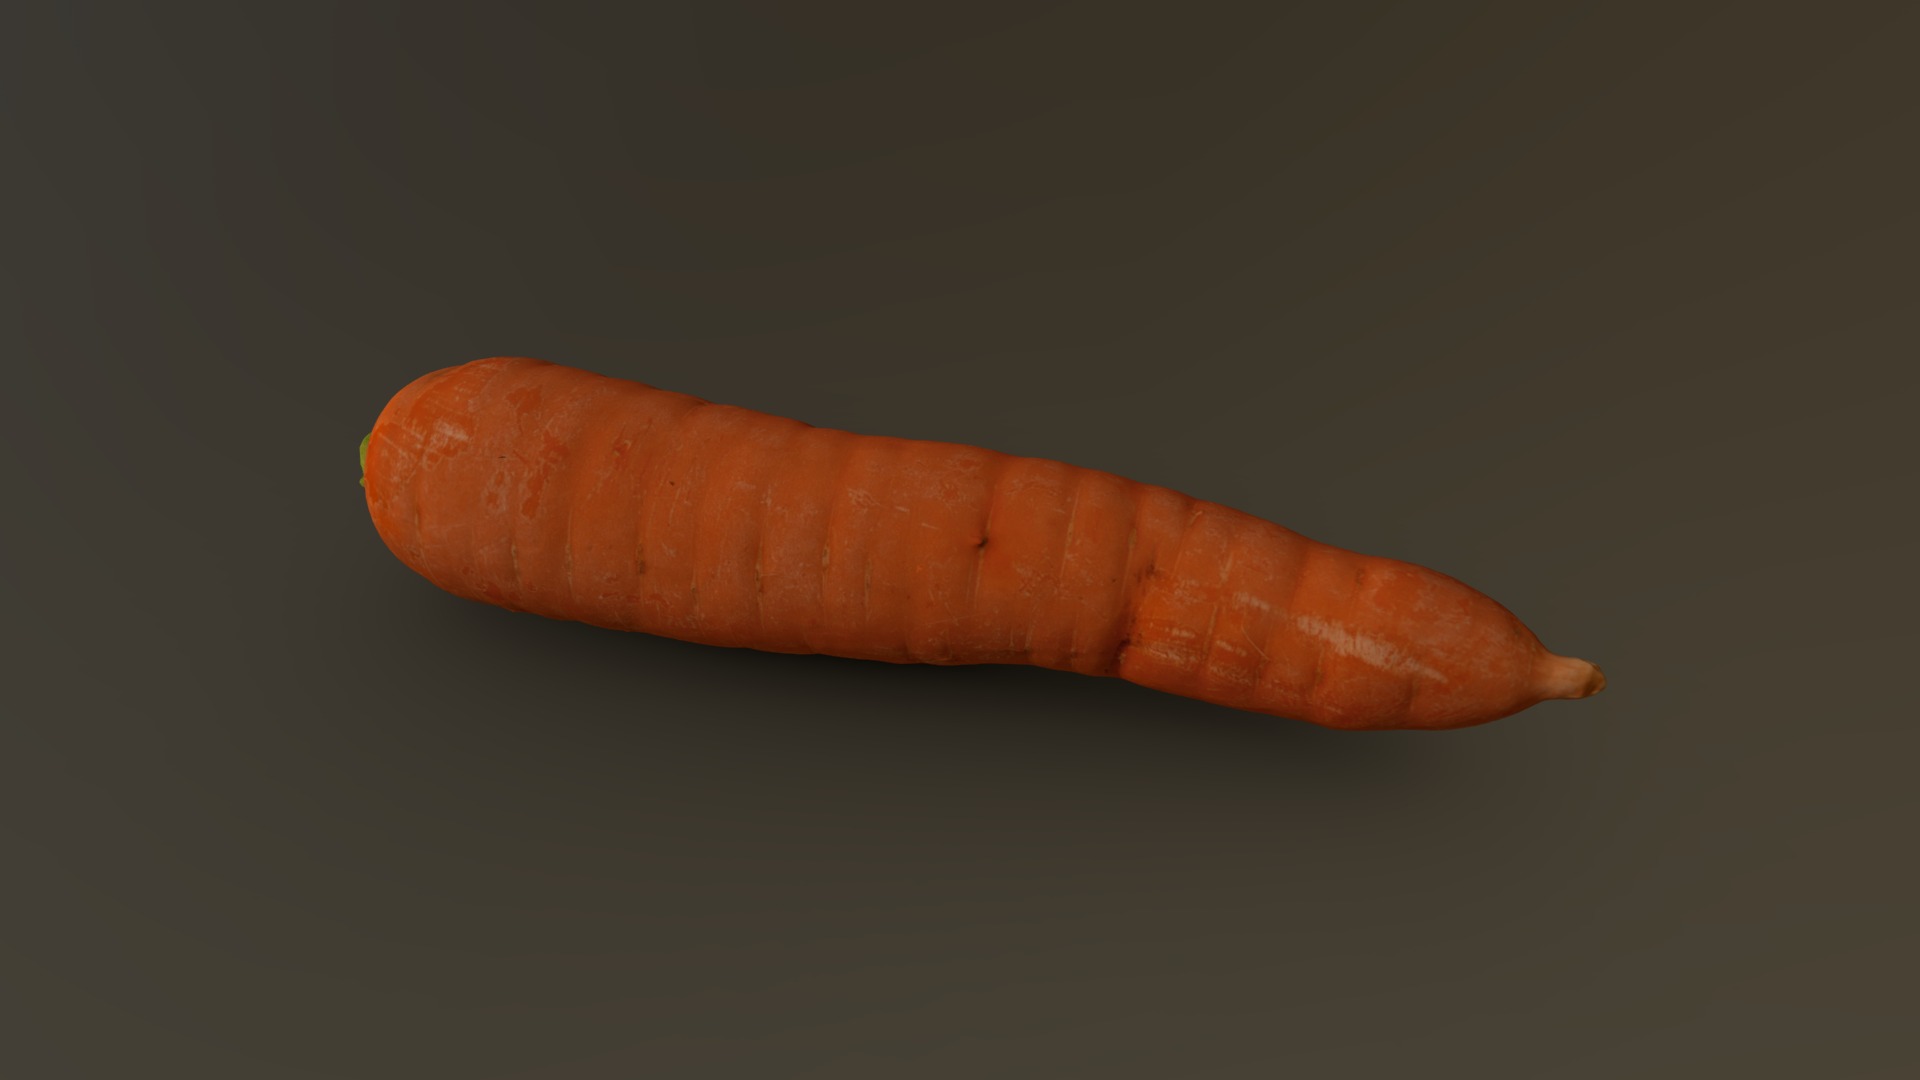 3D model Carrot 12 - This is a 3D model of the Carrot 12. The 3D model is about a carrot with a bite taken out.